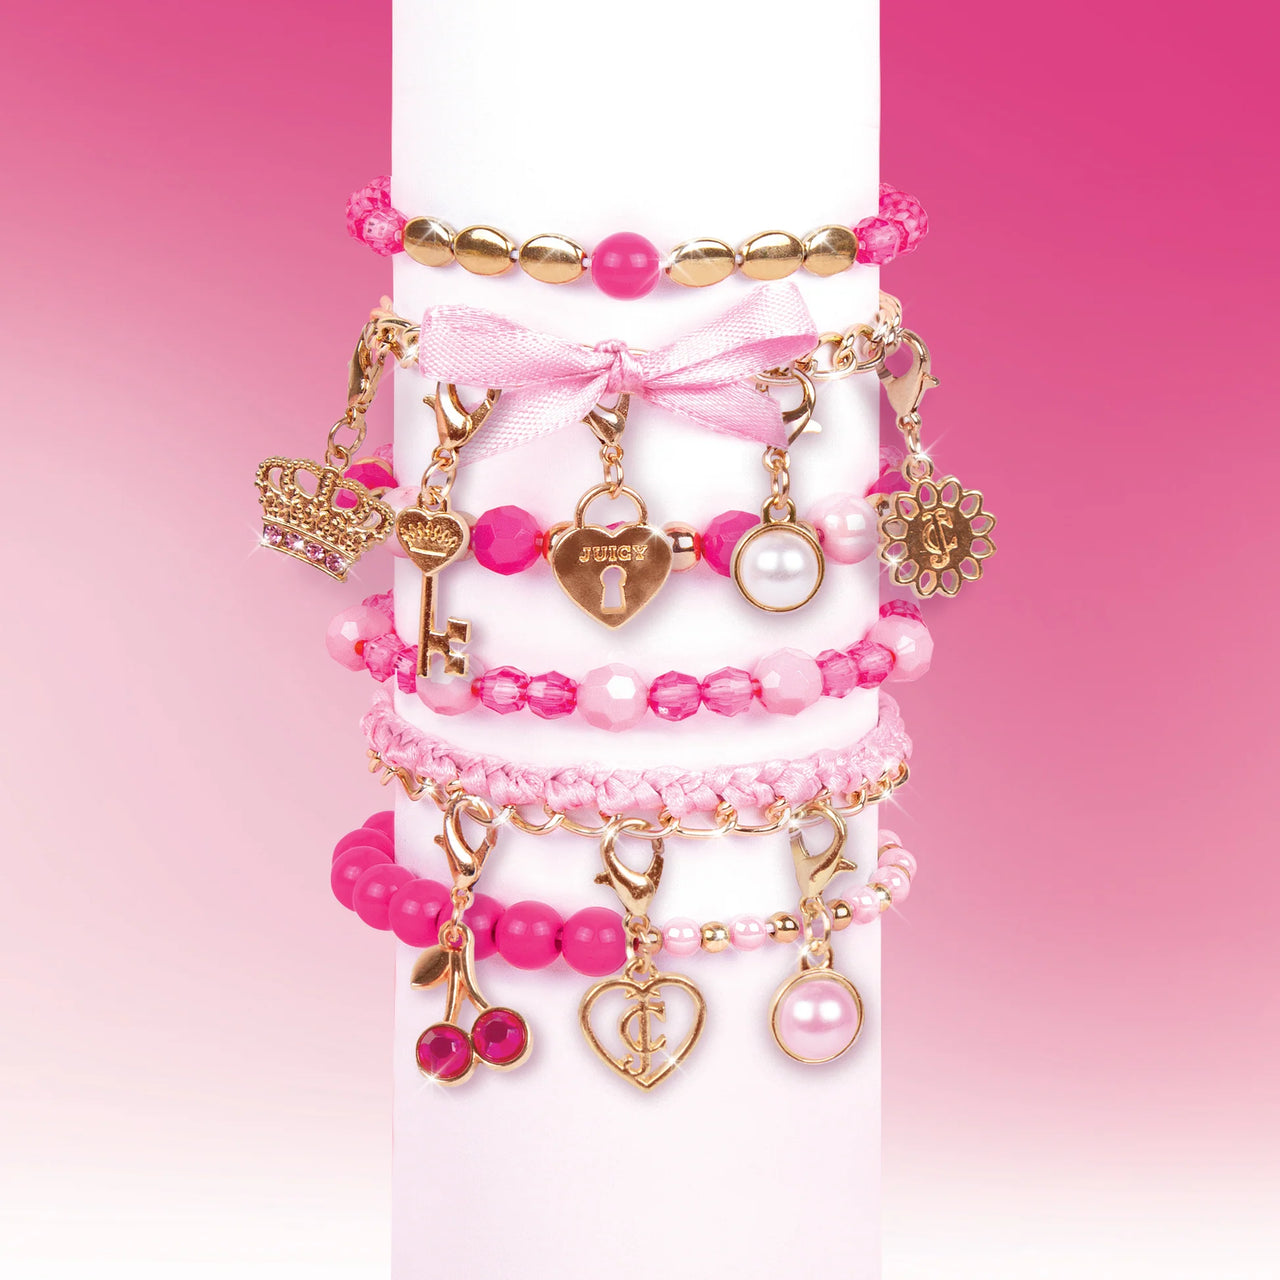 Make It Real: Juicy Couture Perfectly Pink Bracelets